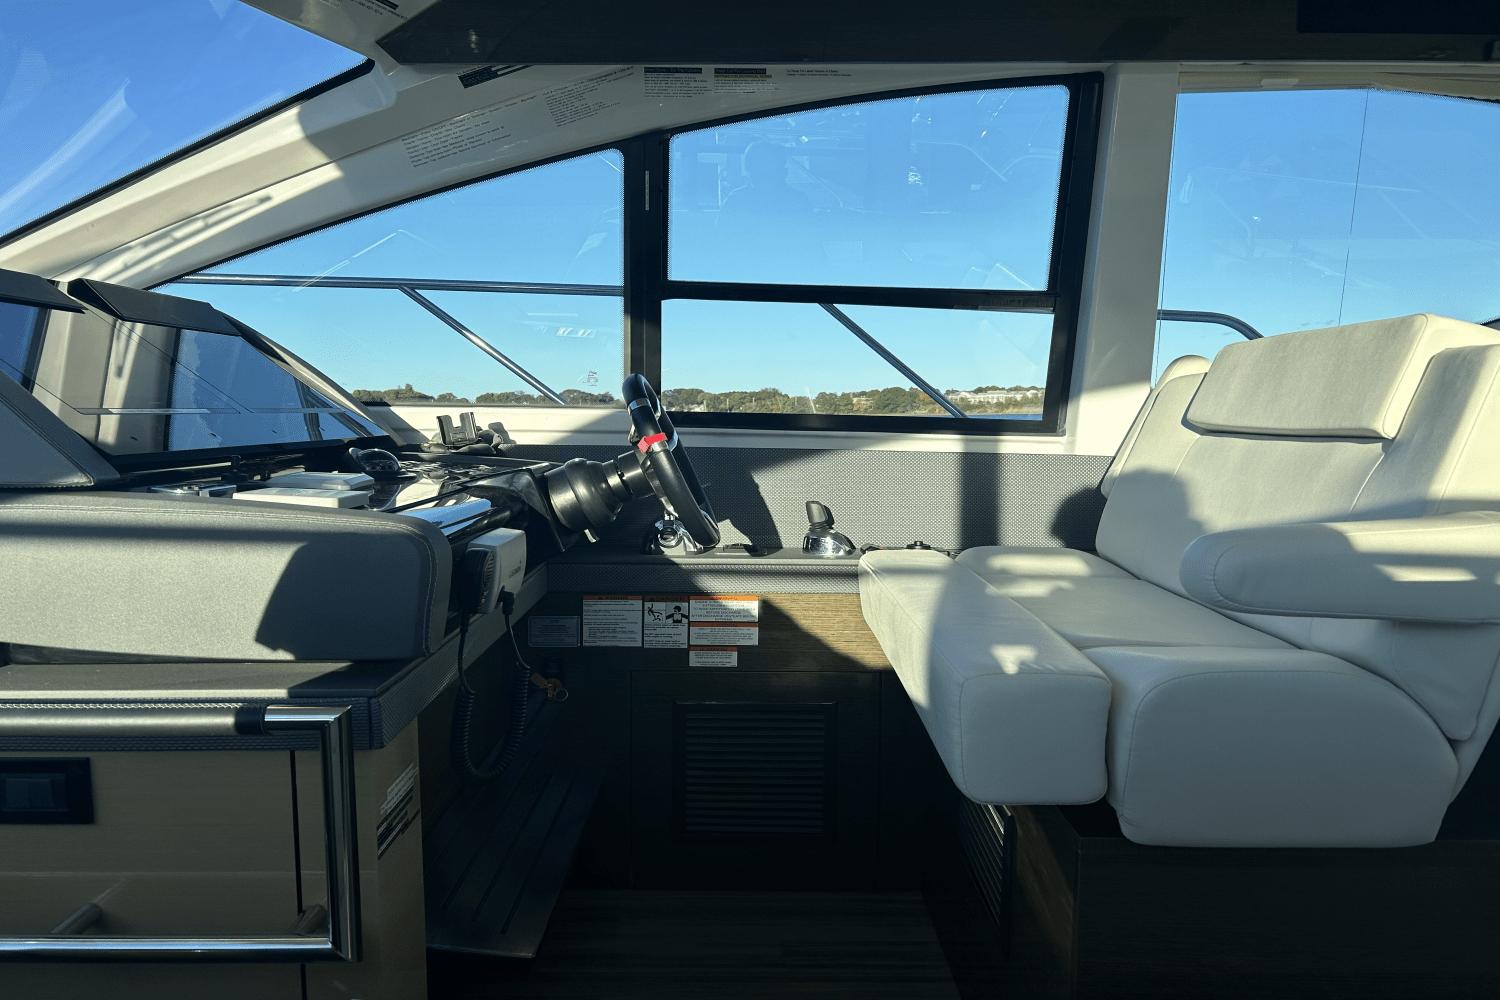 2018 Cruisers Yachts 54 Cantius Fly